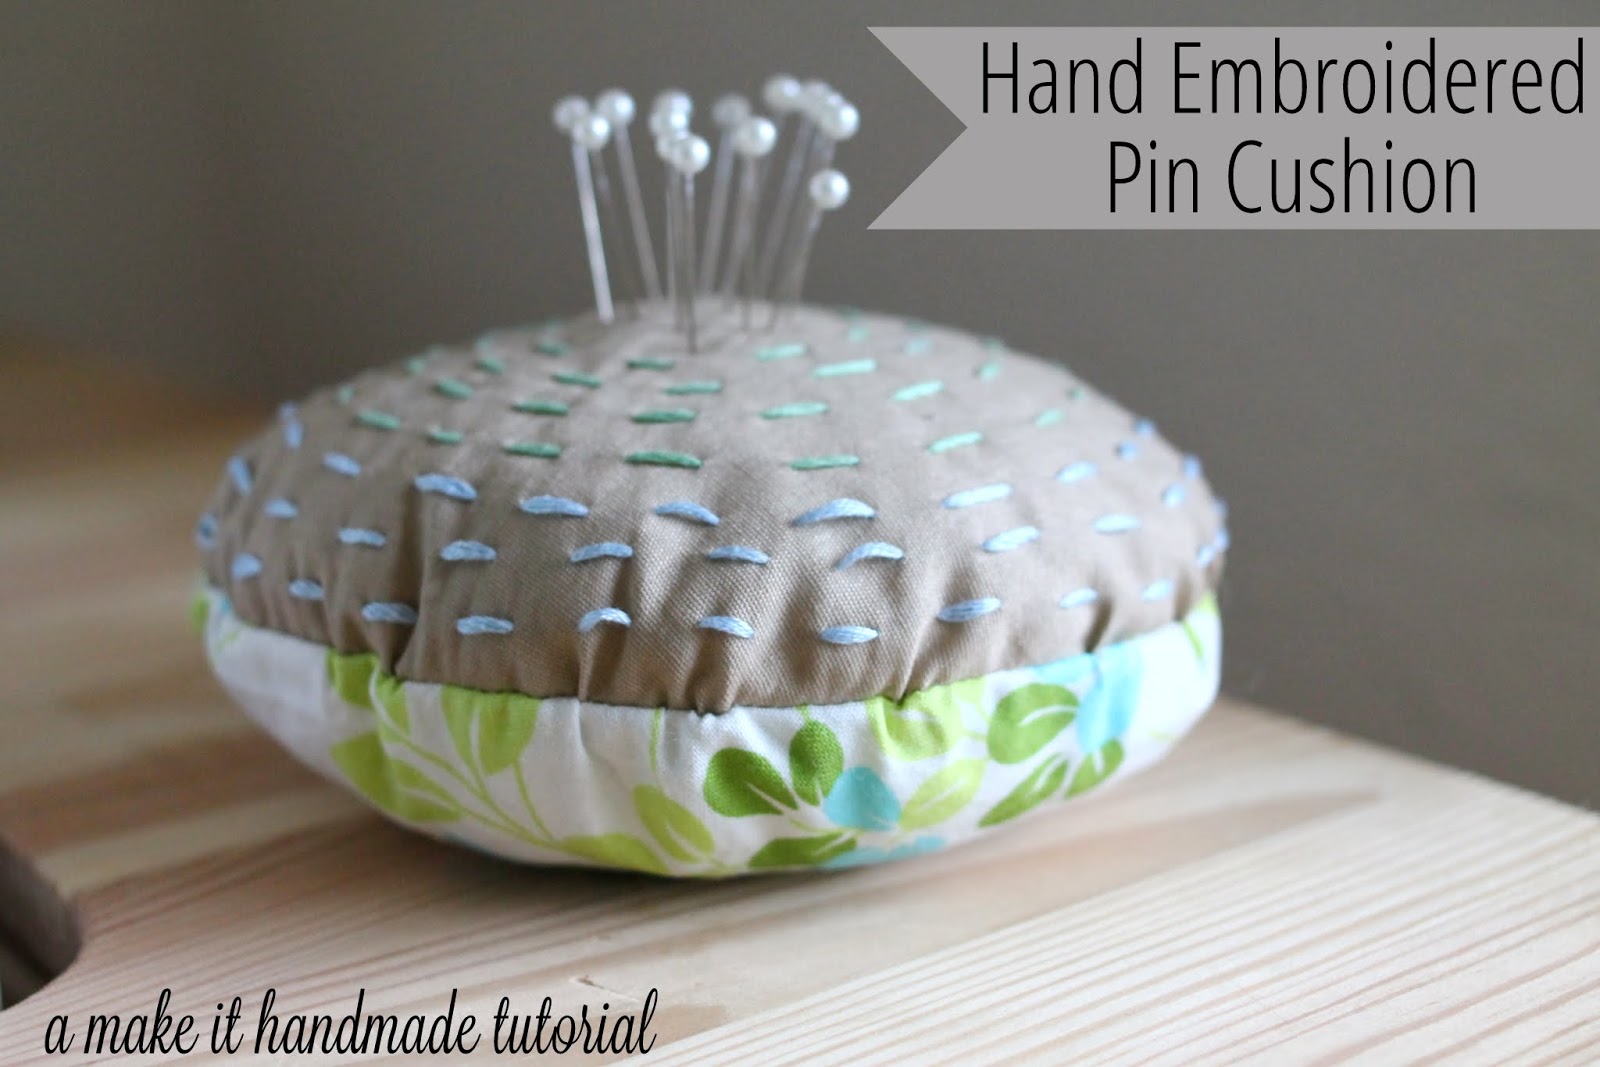 Sewing Pin Cushion Embroidery Design